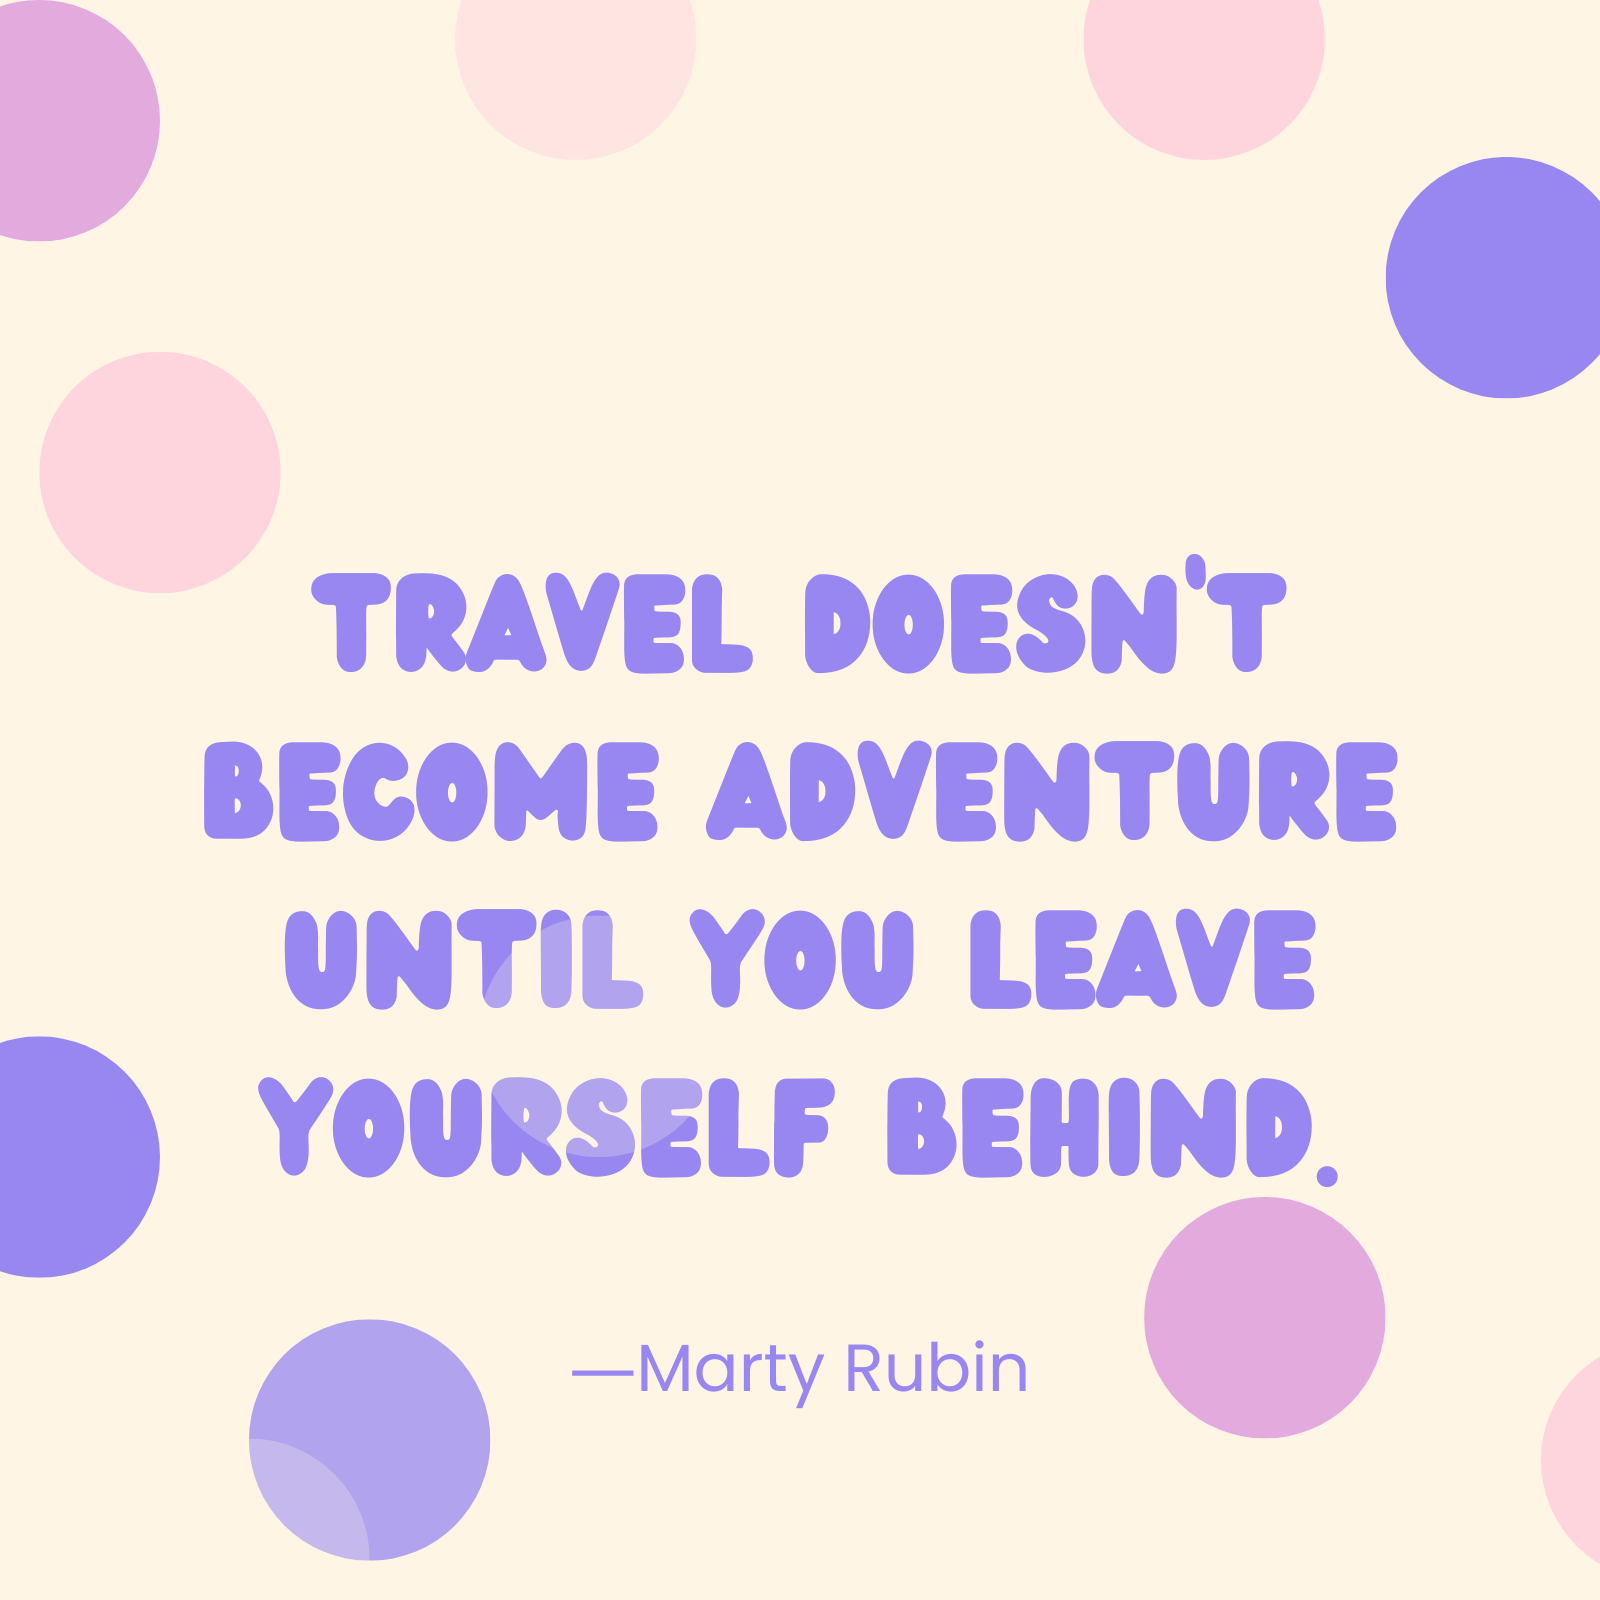 <p>"Travel doesn't become adventure until you leave yourself behind." —Marty Rubin</p>